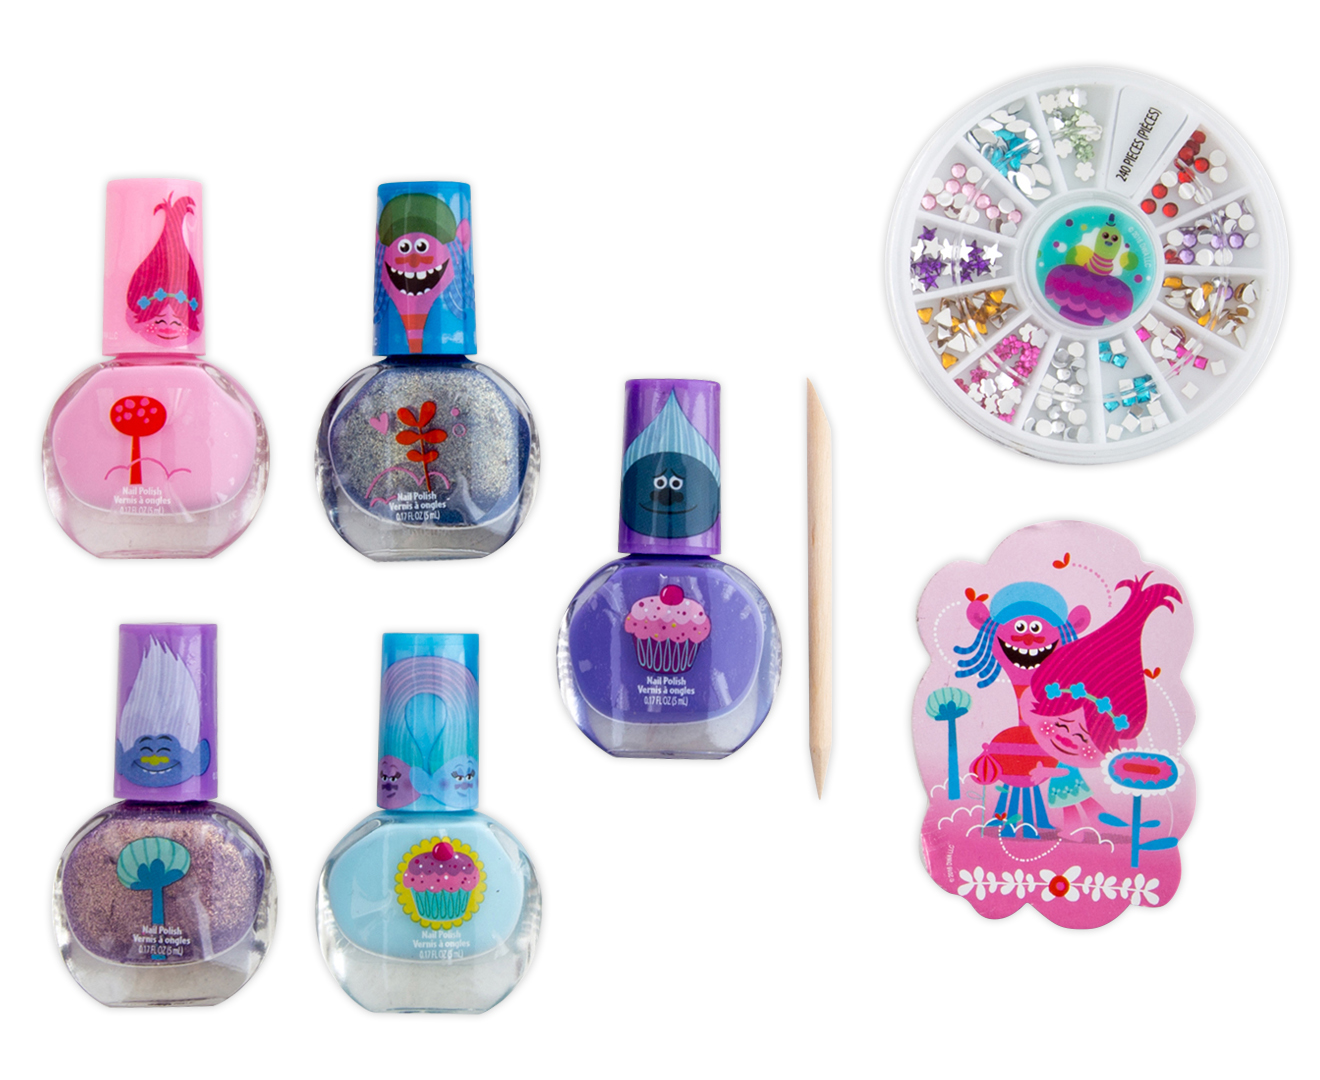 1. Trolls Nail Art Kit with Glitter and Stickers - wide 10